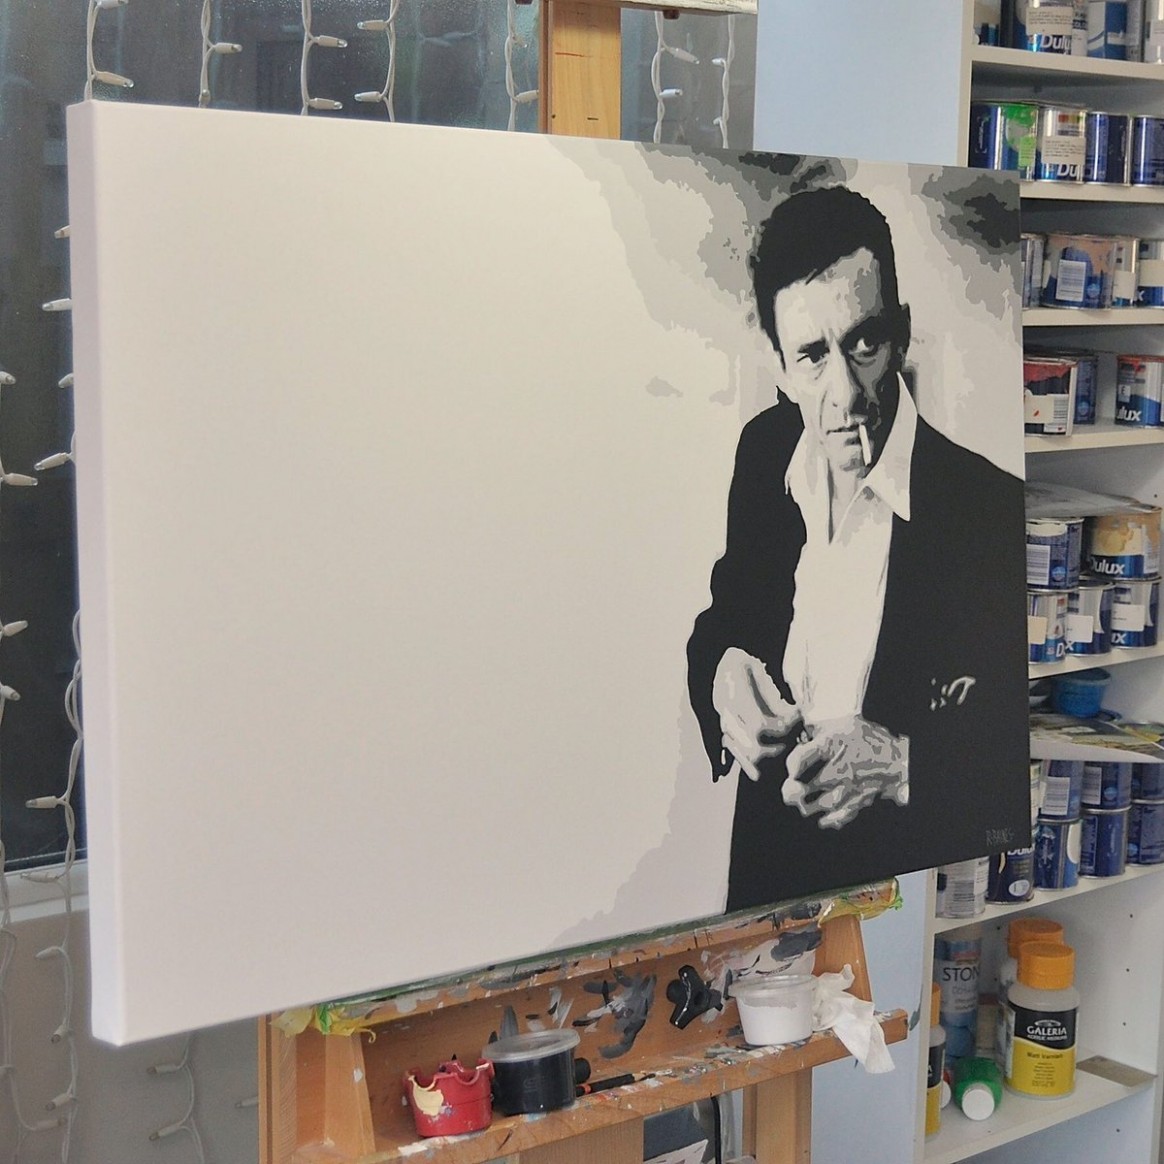 Ross Baines Art On Twitter: "original Canvas Paintings Of Your ..